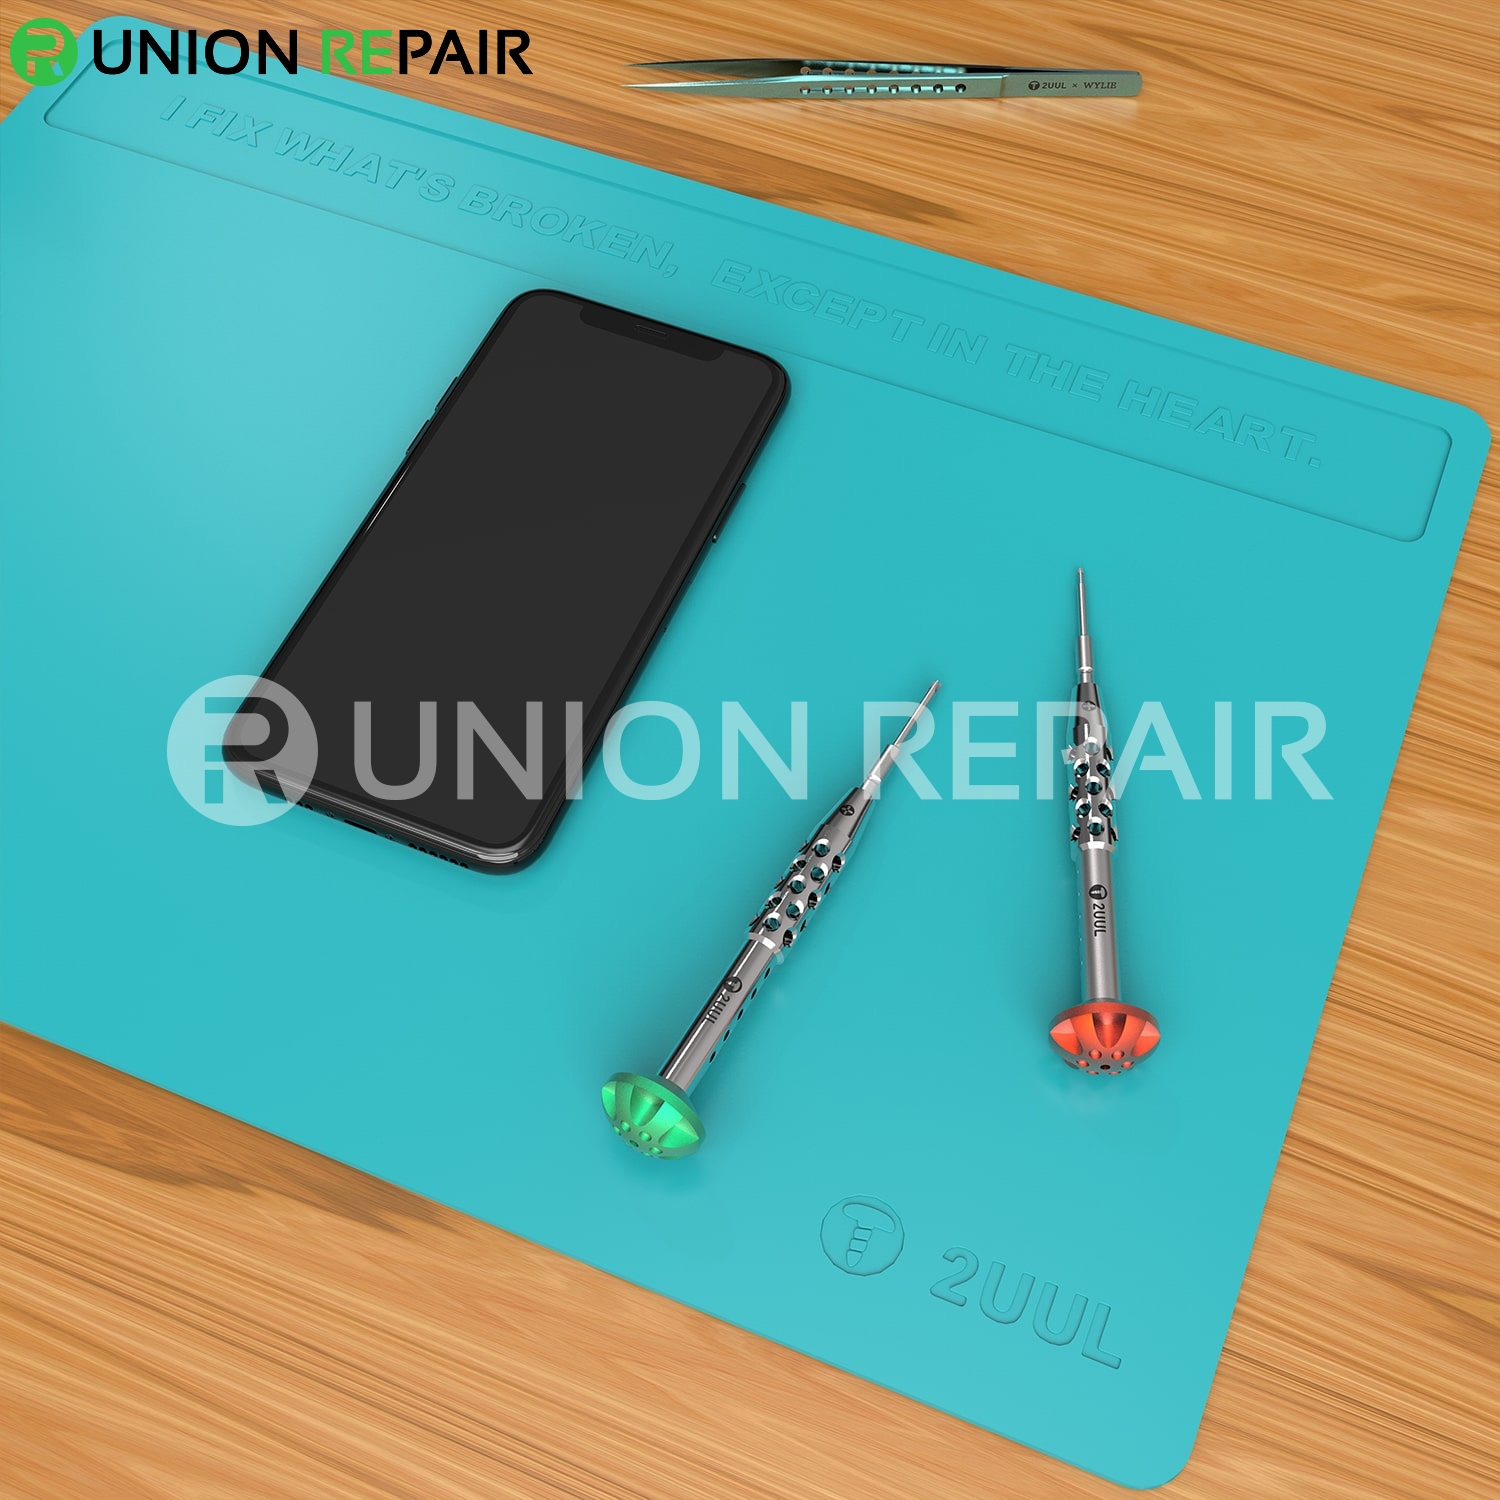 2UUL Heat Resisting Silicone Pad with Anti Dust Coating 400mm*280mm